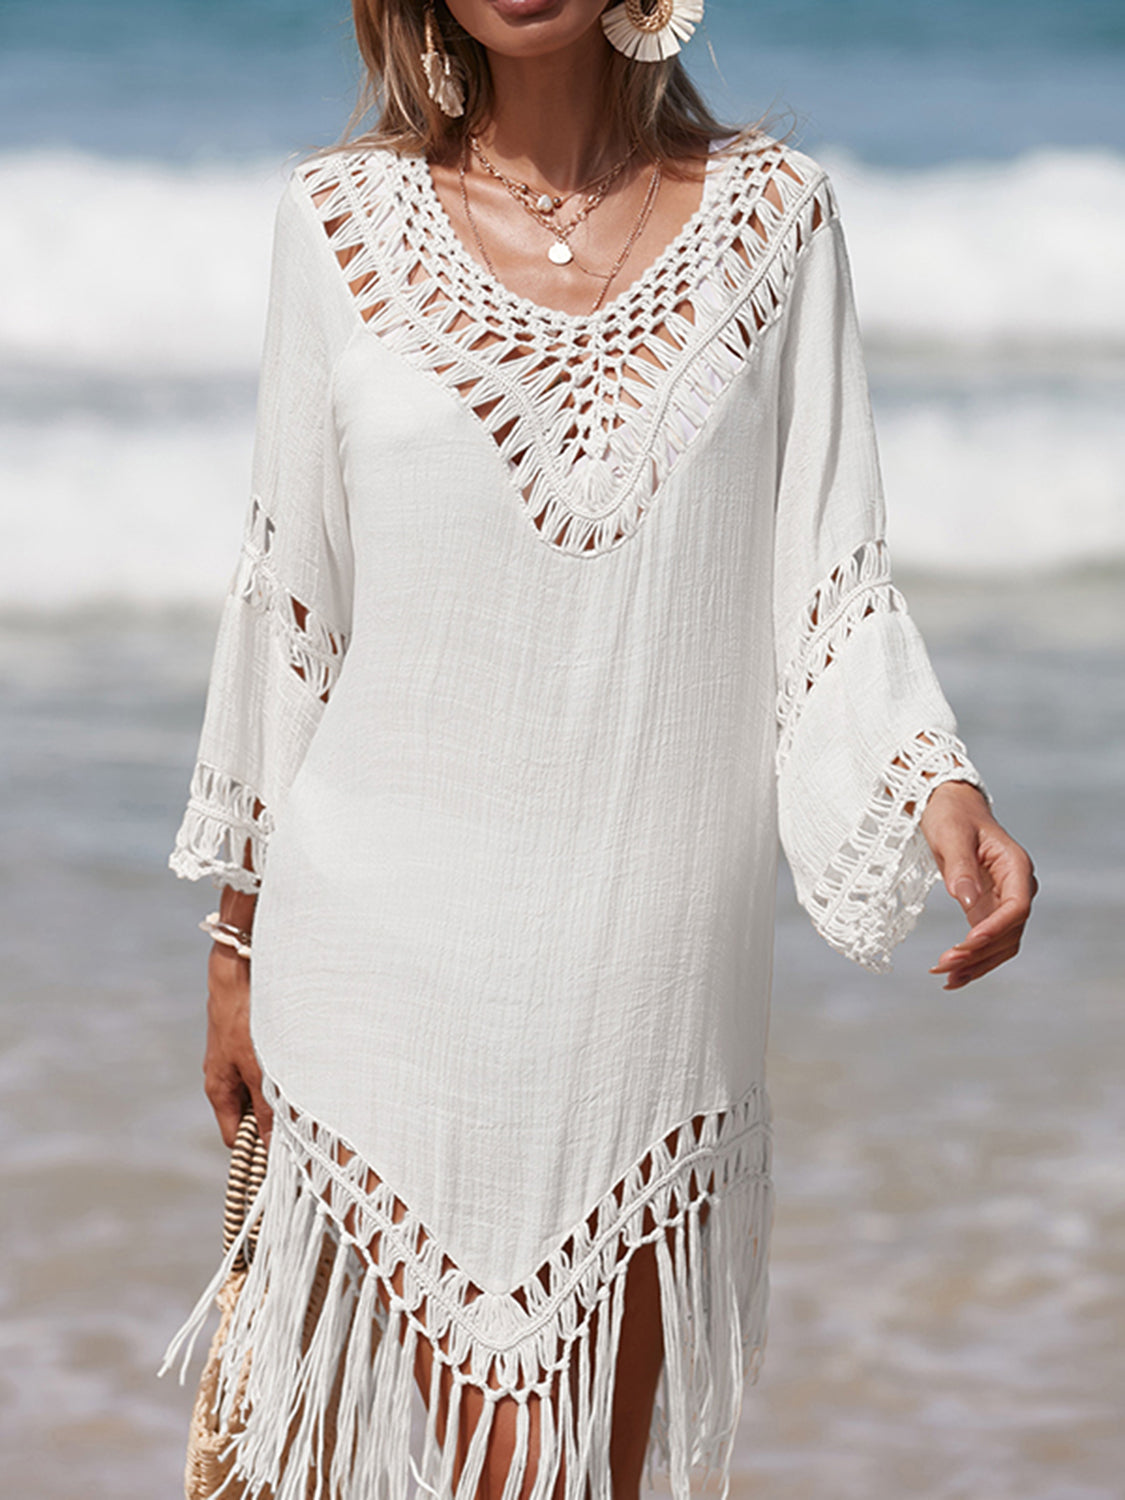 Sunset Vacation  Cutout Fringe Scoop Neck Beach Cover Up Sunset and Swim   